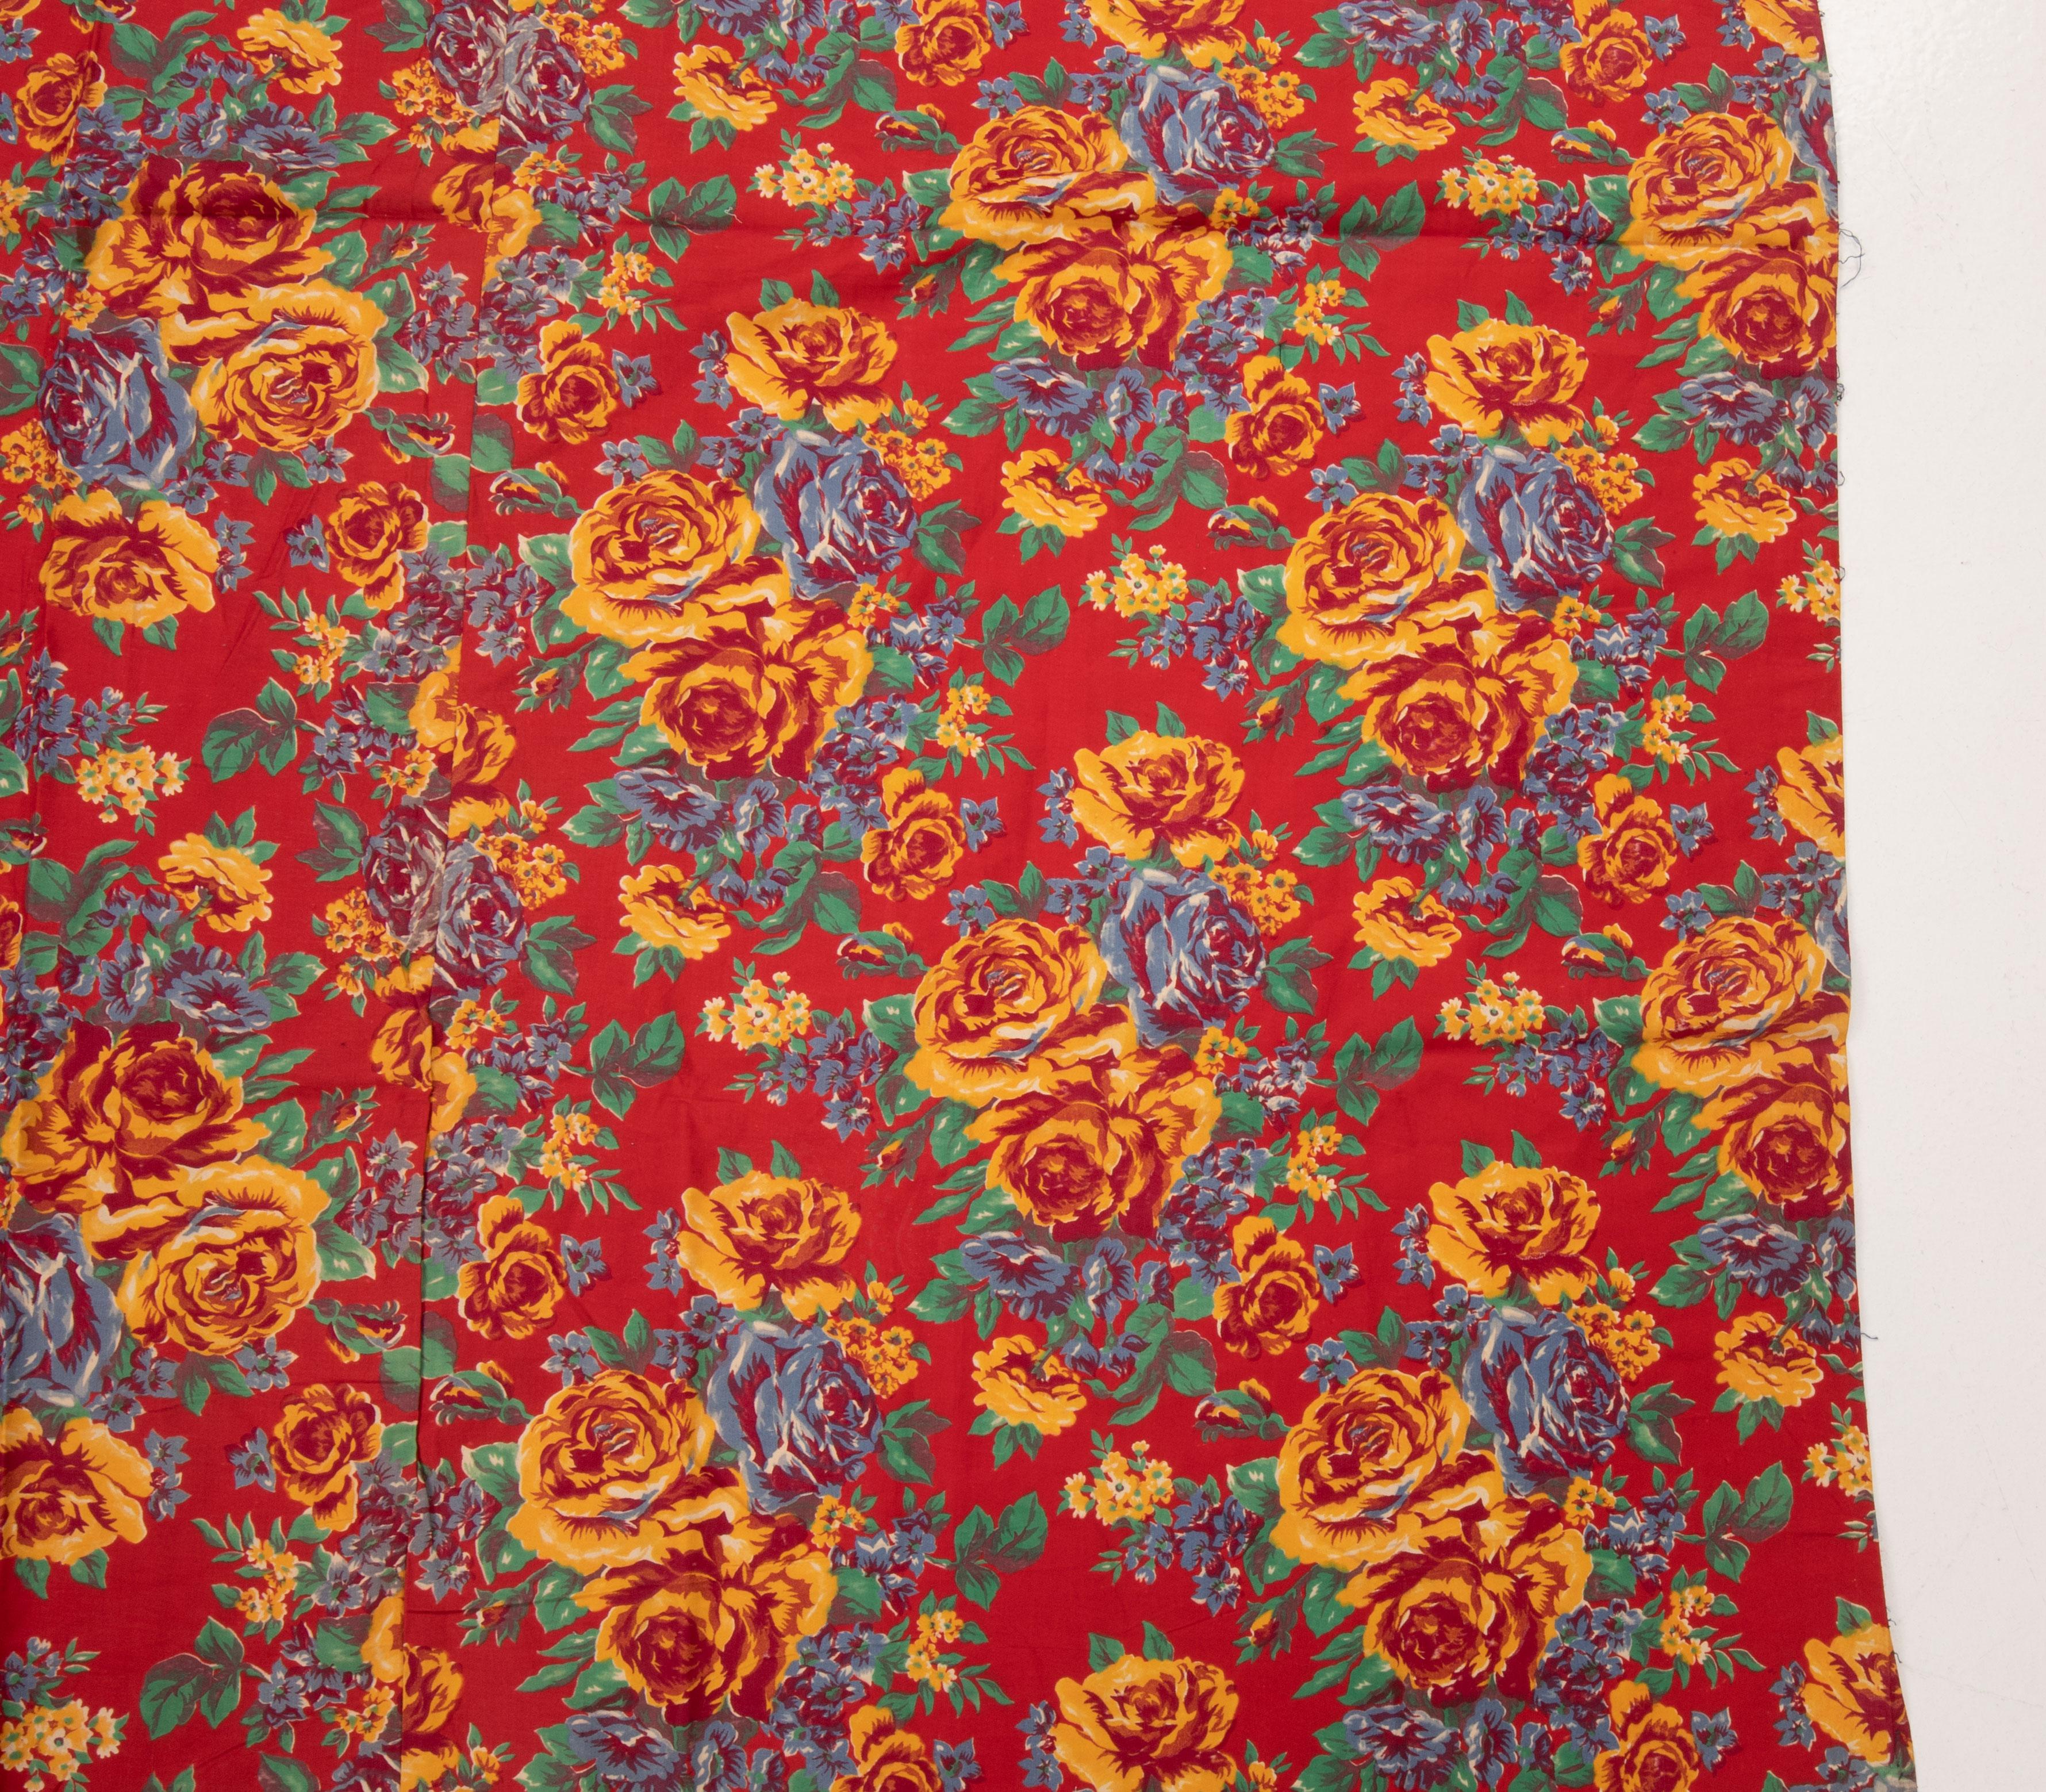 Woven Roller Printed Cotton Panel, Made for Central Asian Markets  Mid 20th C.  Russia For Sale